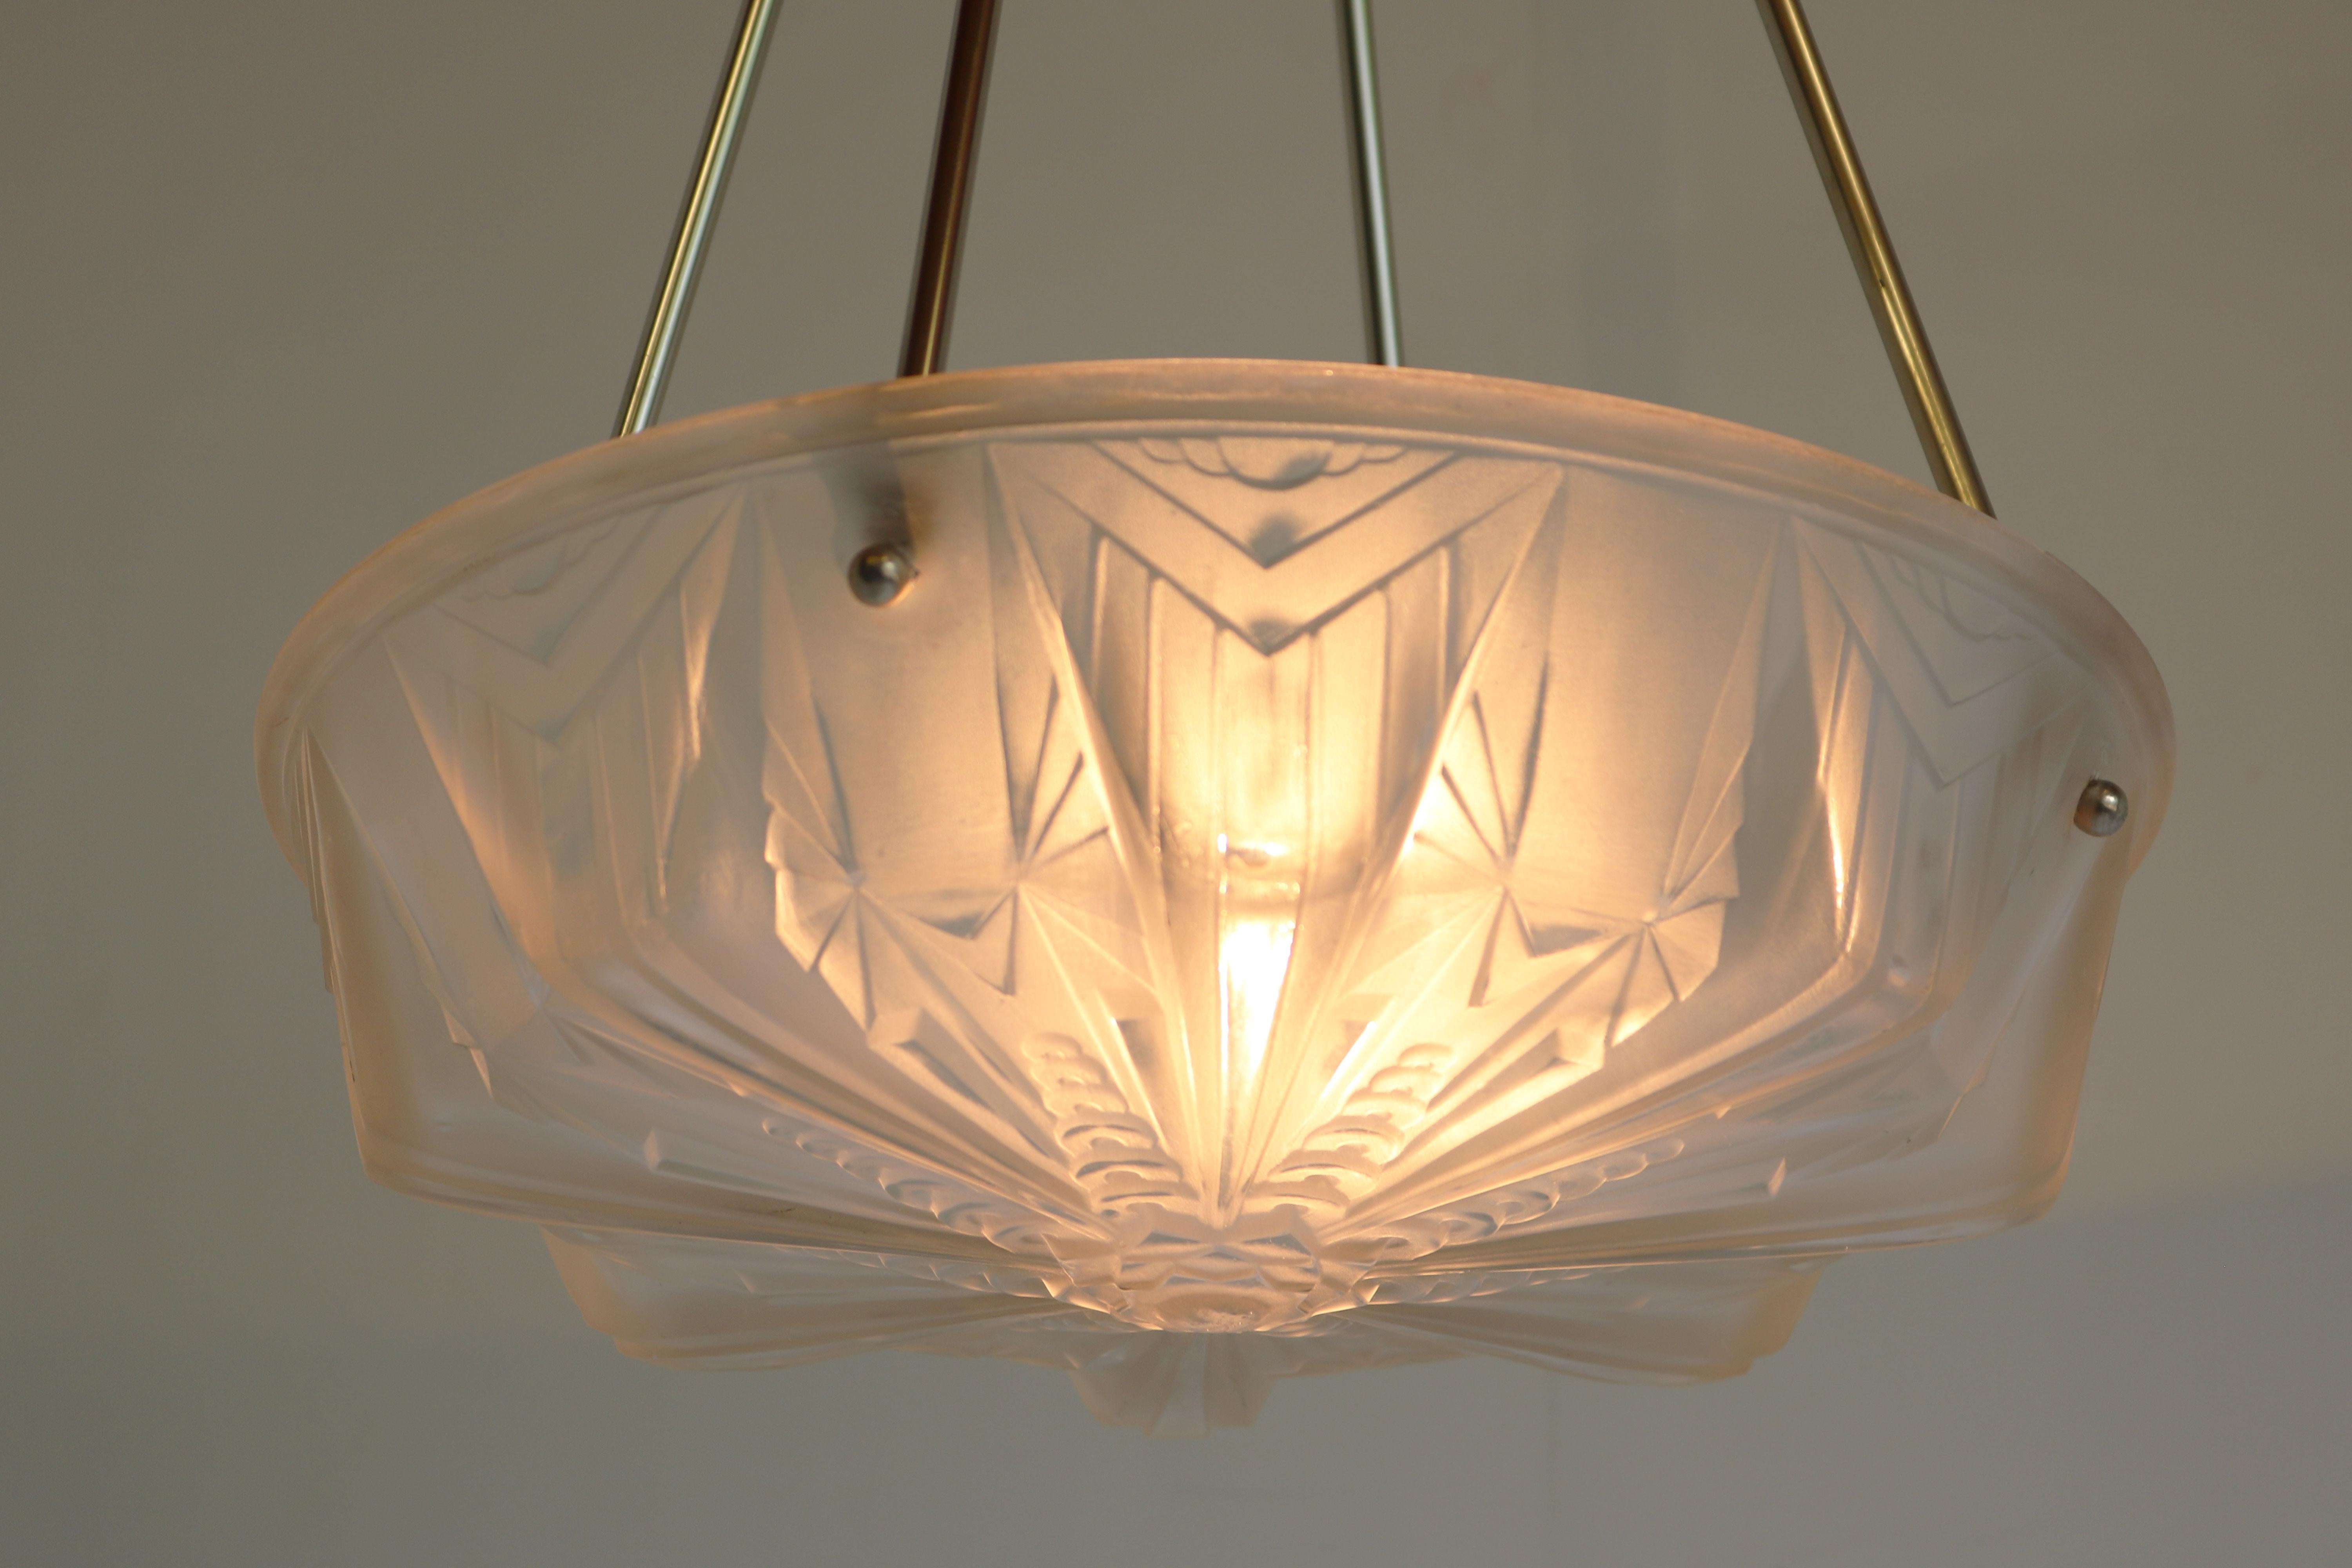 Hand-Crafted Geometric Art Deco Pendant / Chandelier 1930 France by Muller Frères Luneville For Sale